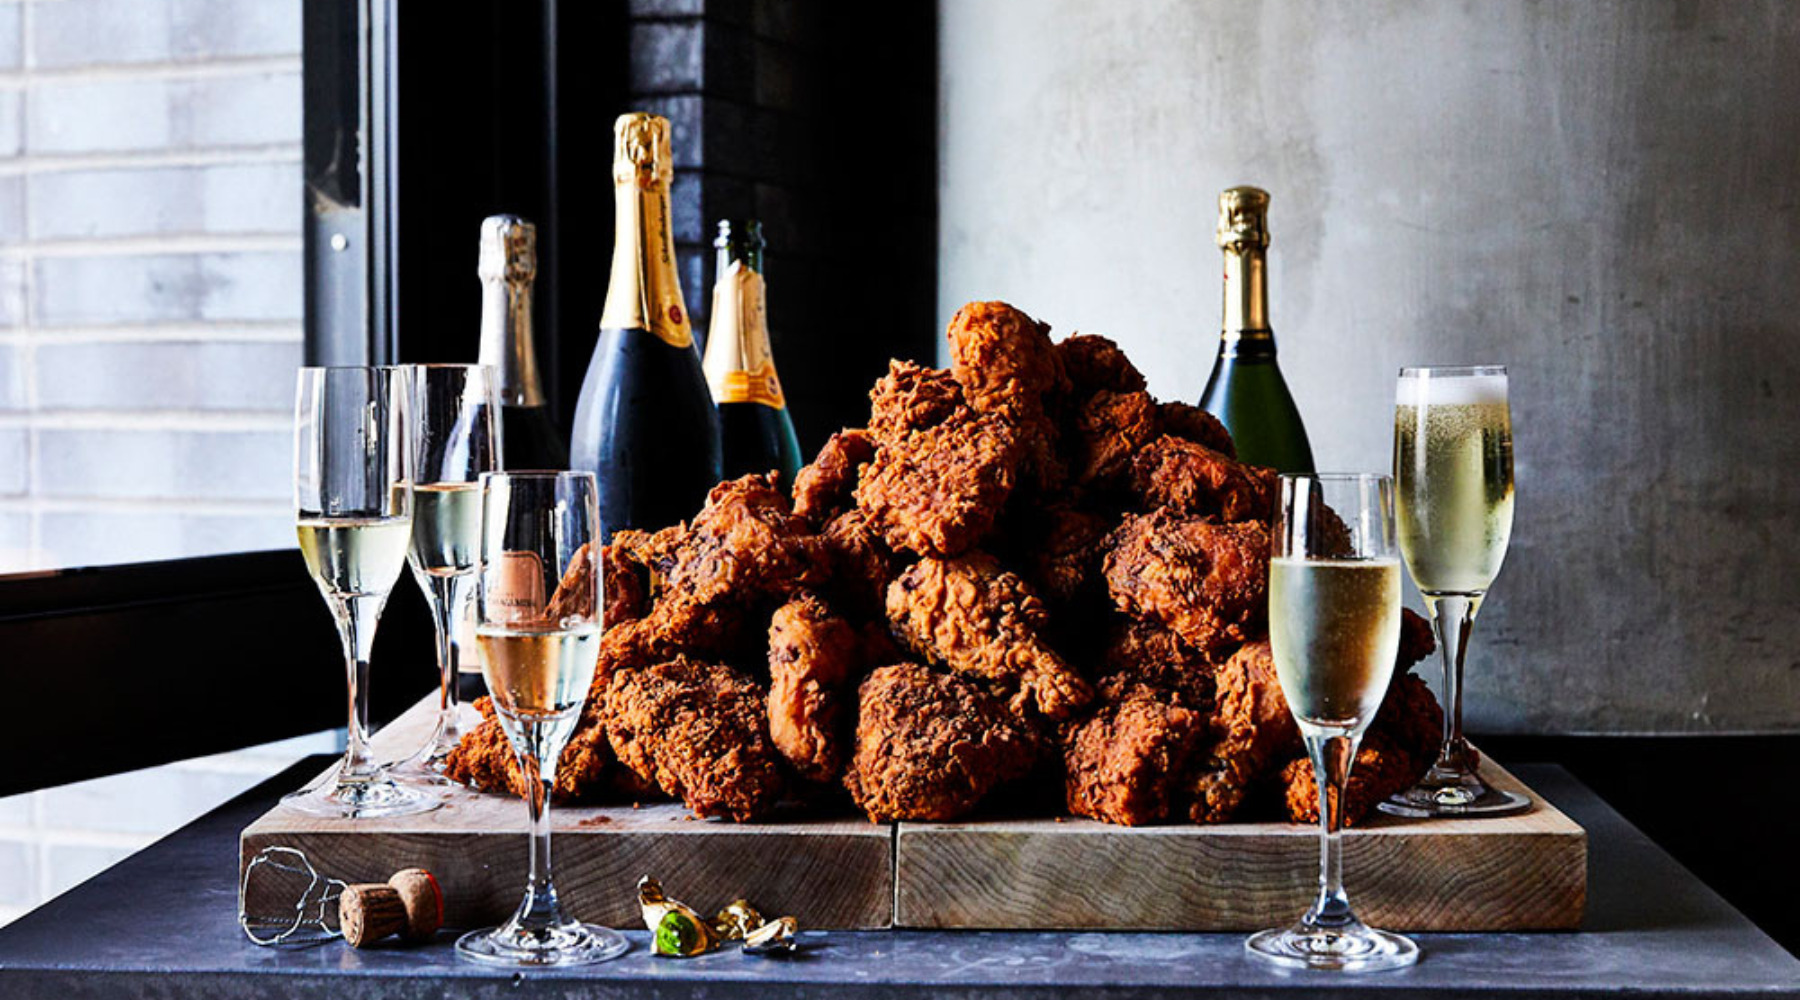 Fried chicken and bottles of Champagne from the Birds, Bubbles & Blues event at the Austin Hotel restaurant Geraldine's